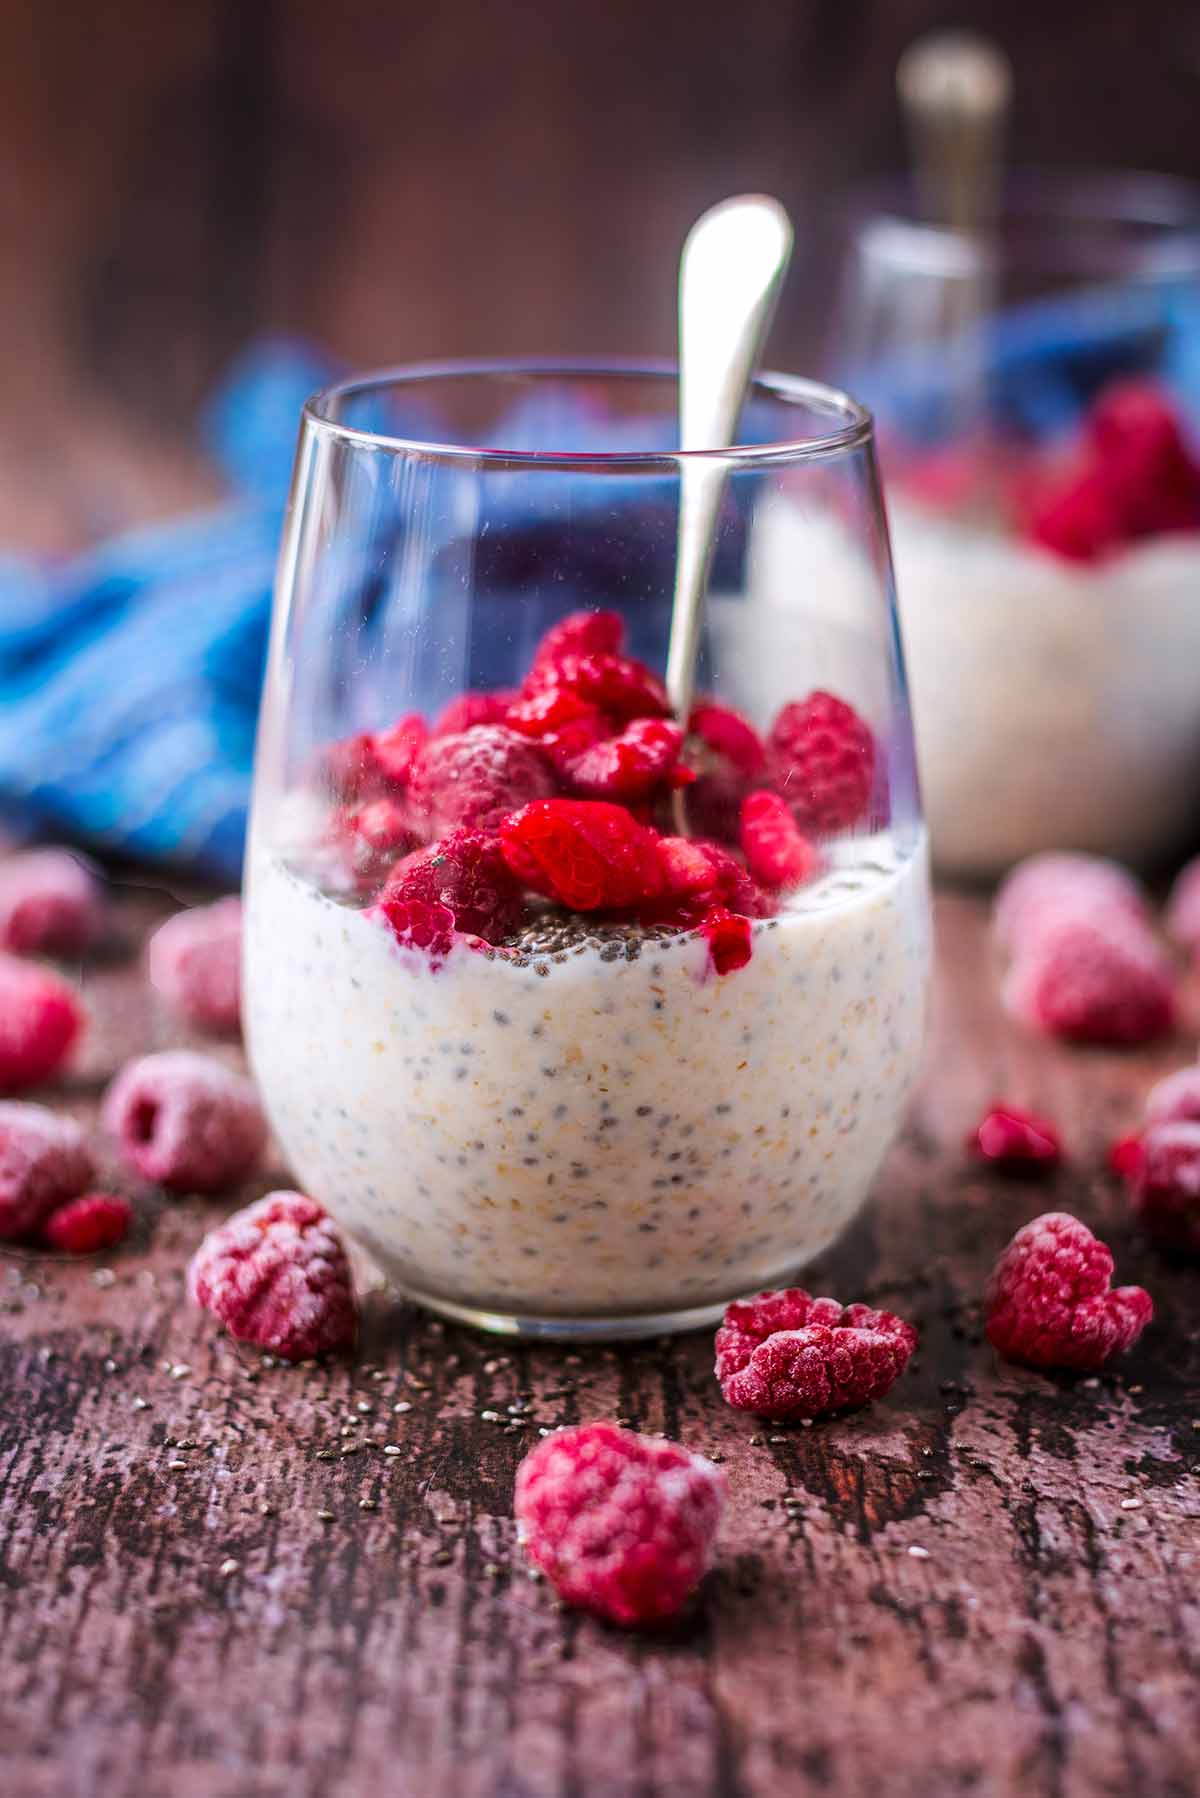 A glass of overnight oats topped with raspberries and surrounded by more raspberries.